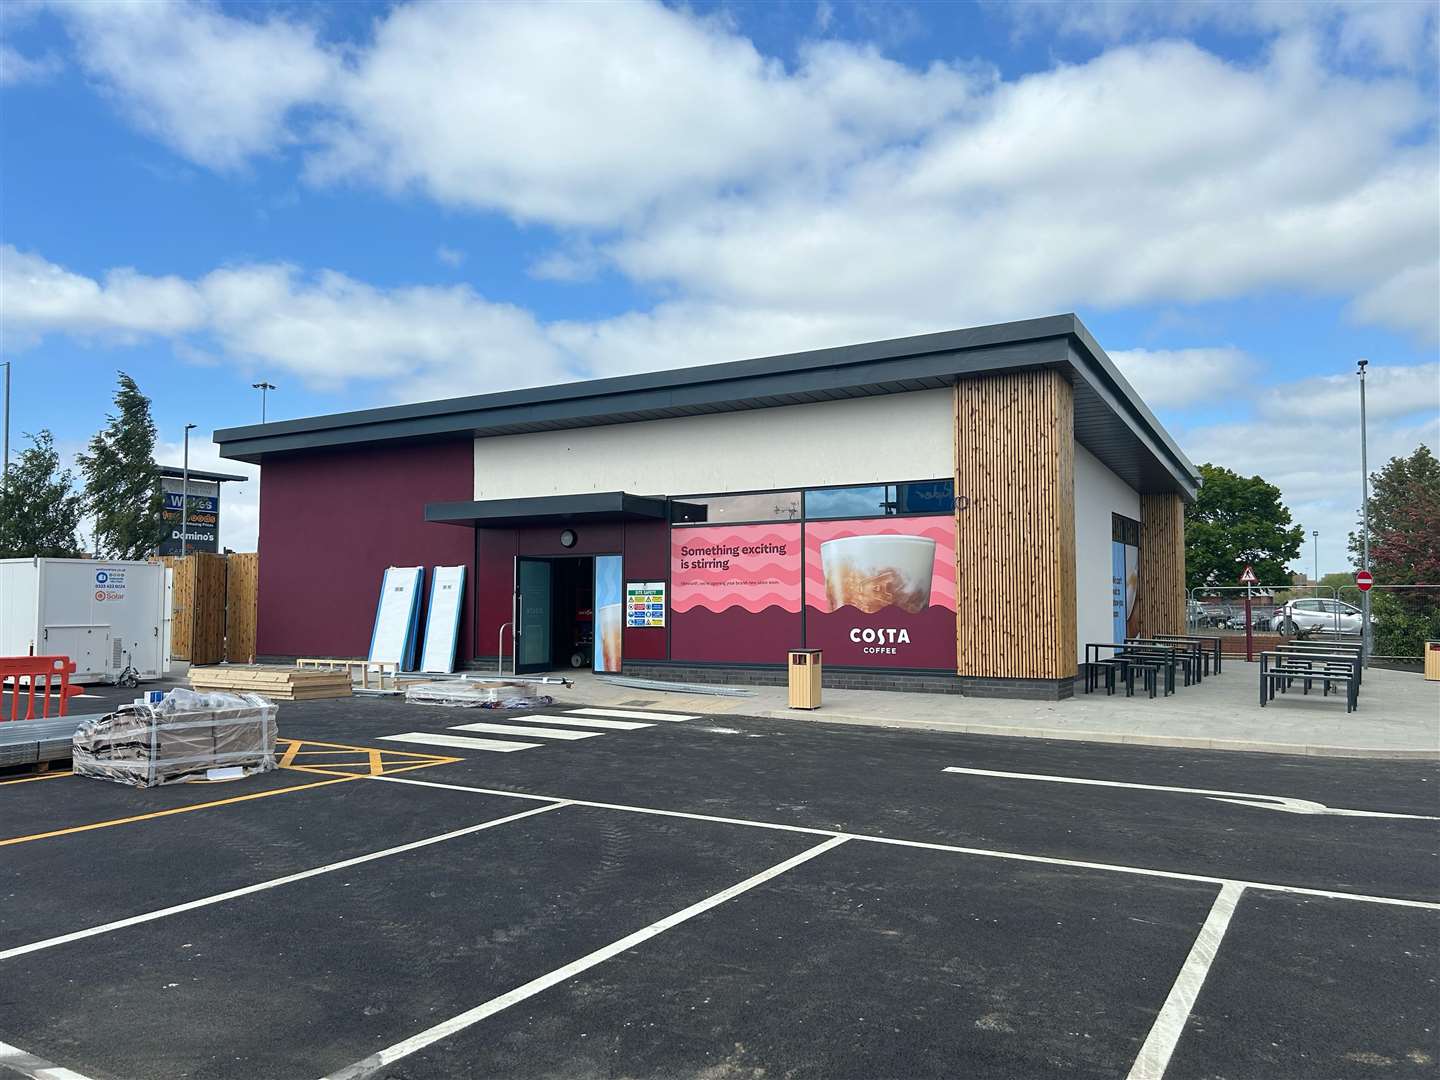 The new Costa store at Lynn's St Nicholas Retail Park